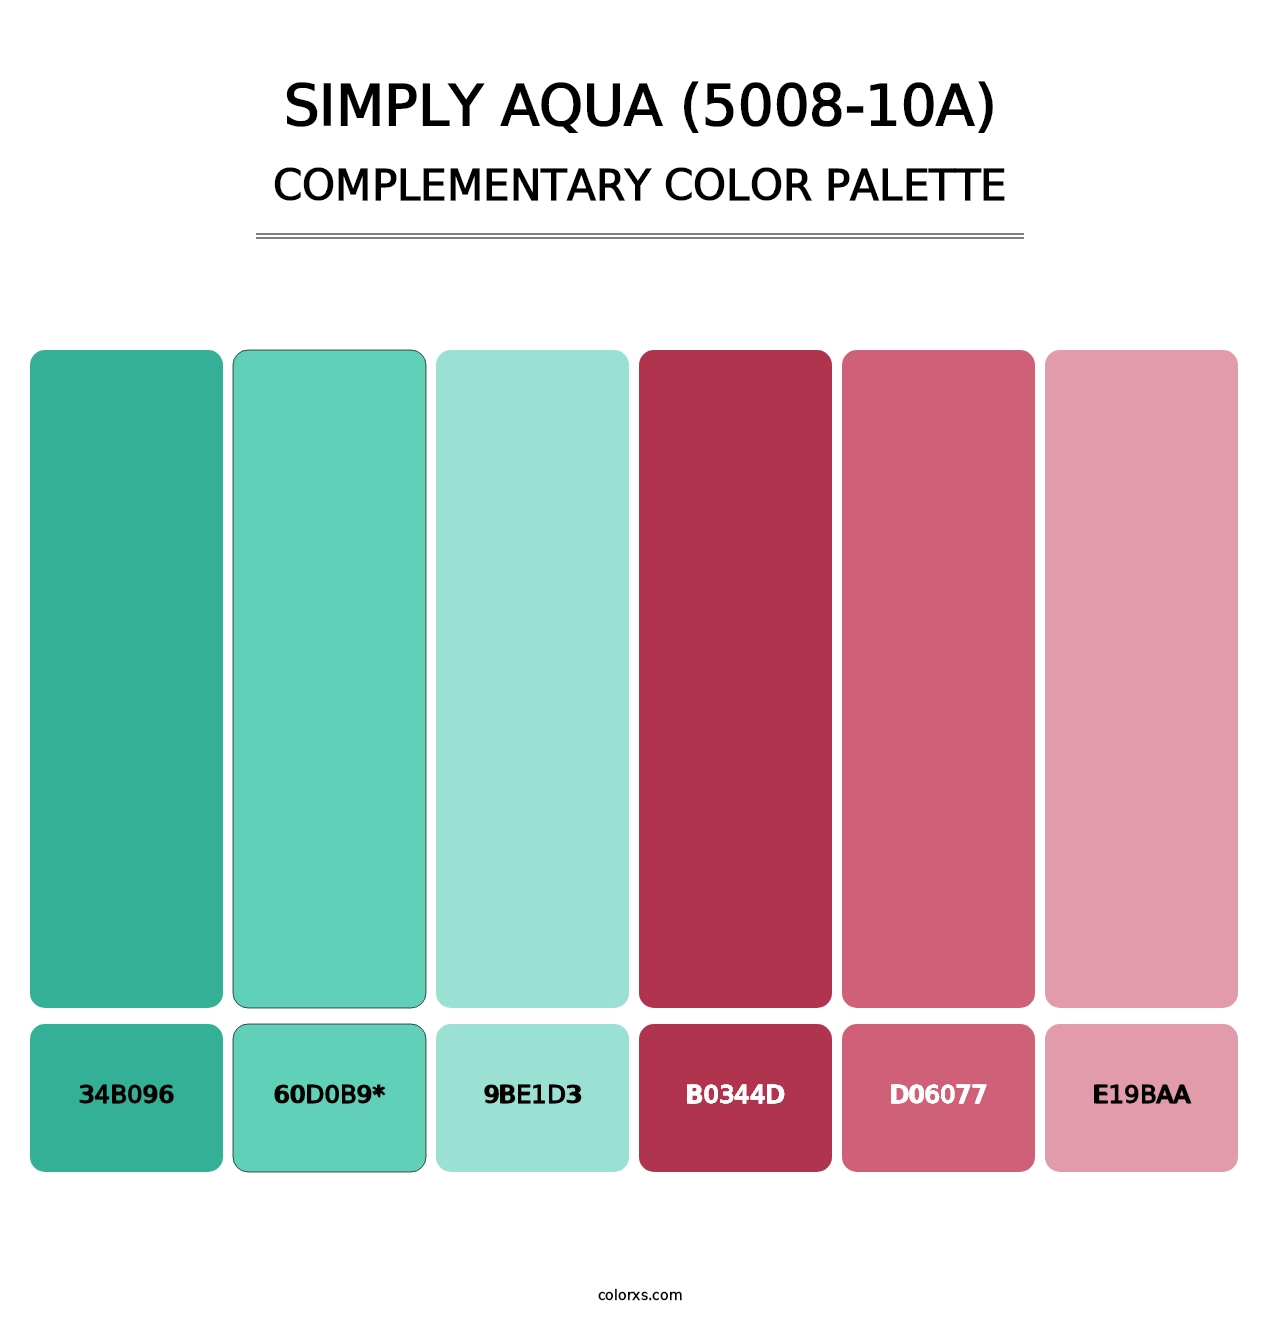 Simply Aqua (5008-10A) - Complementary Color Palette